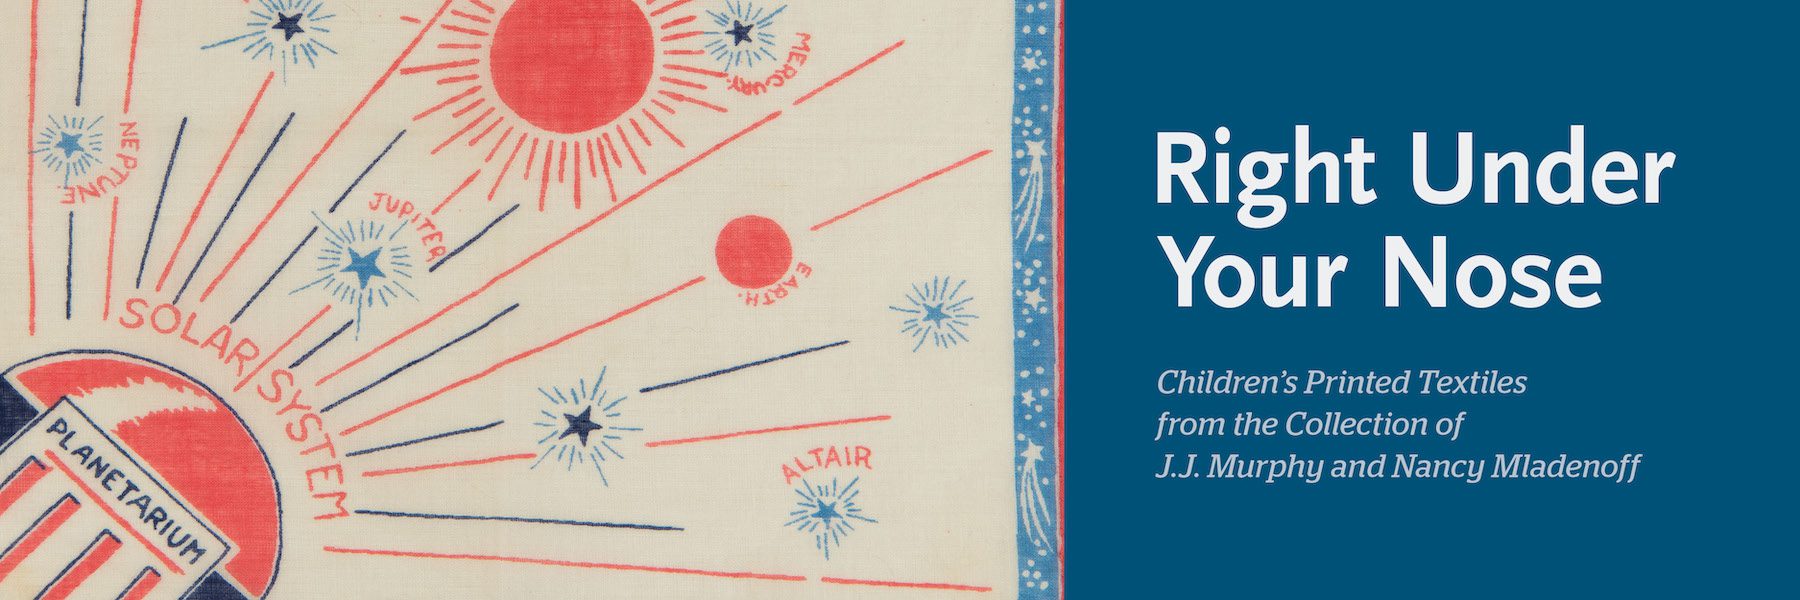 Online Exhibition "Right Under Your Nose: Children's Printed Textiles from the Collection of J.J. Murphy and Nancy Mladenoff"